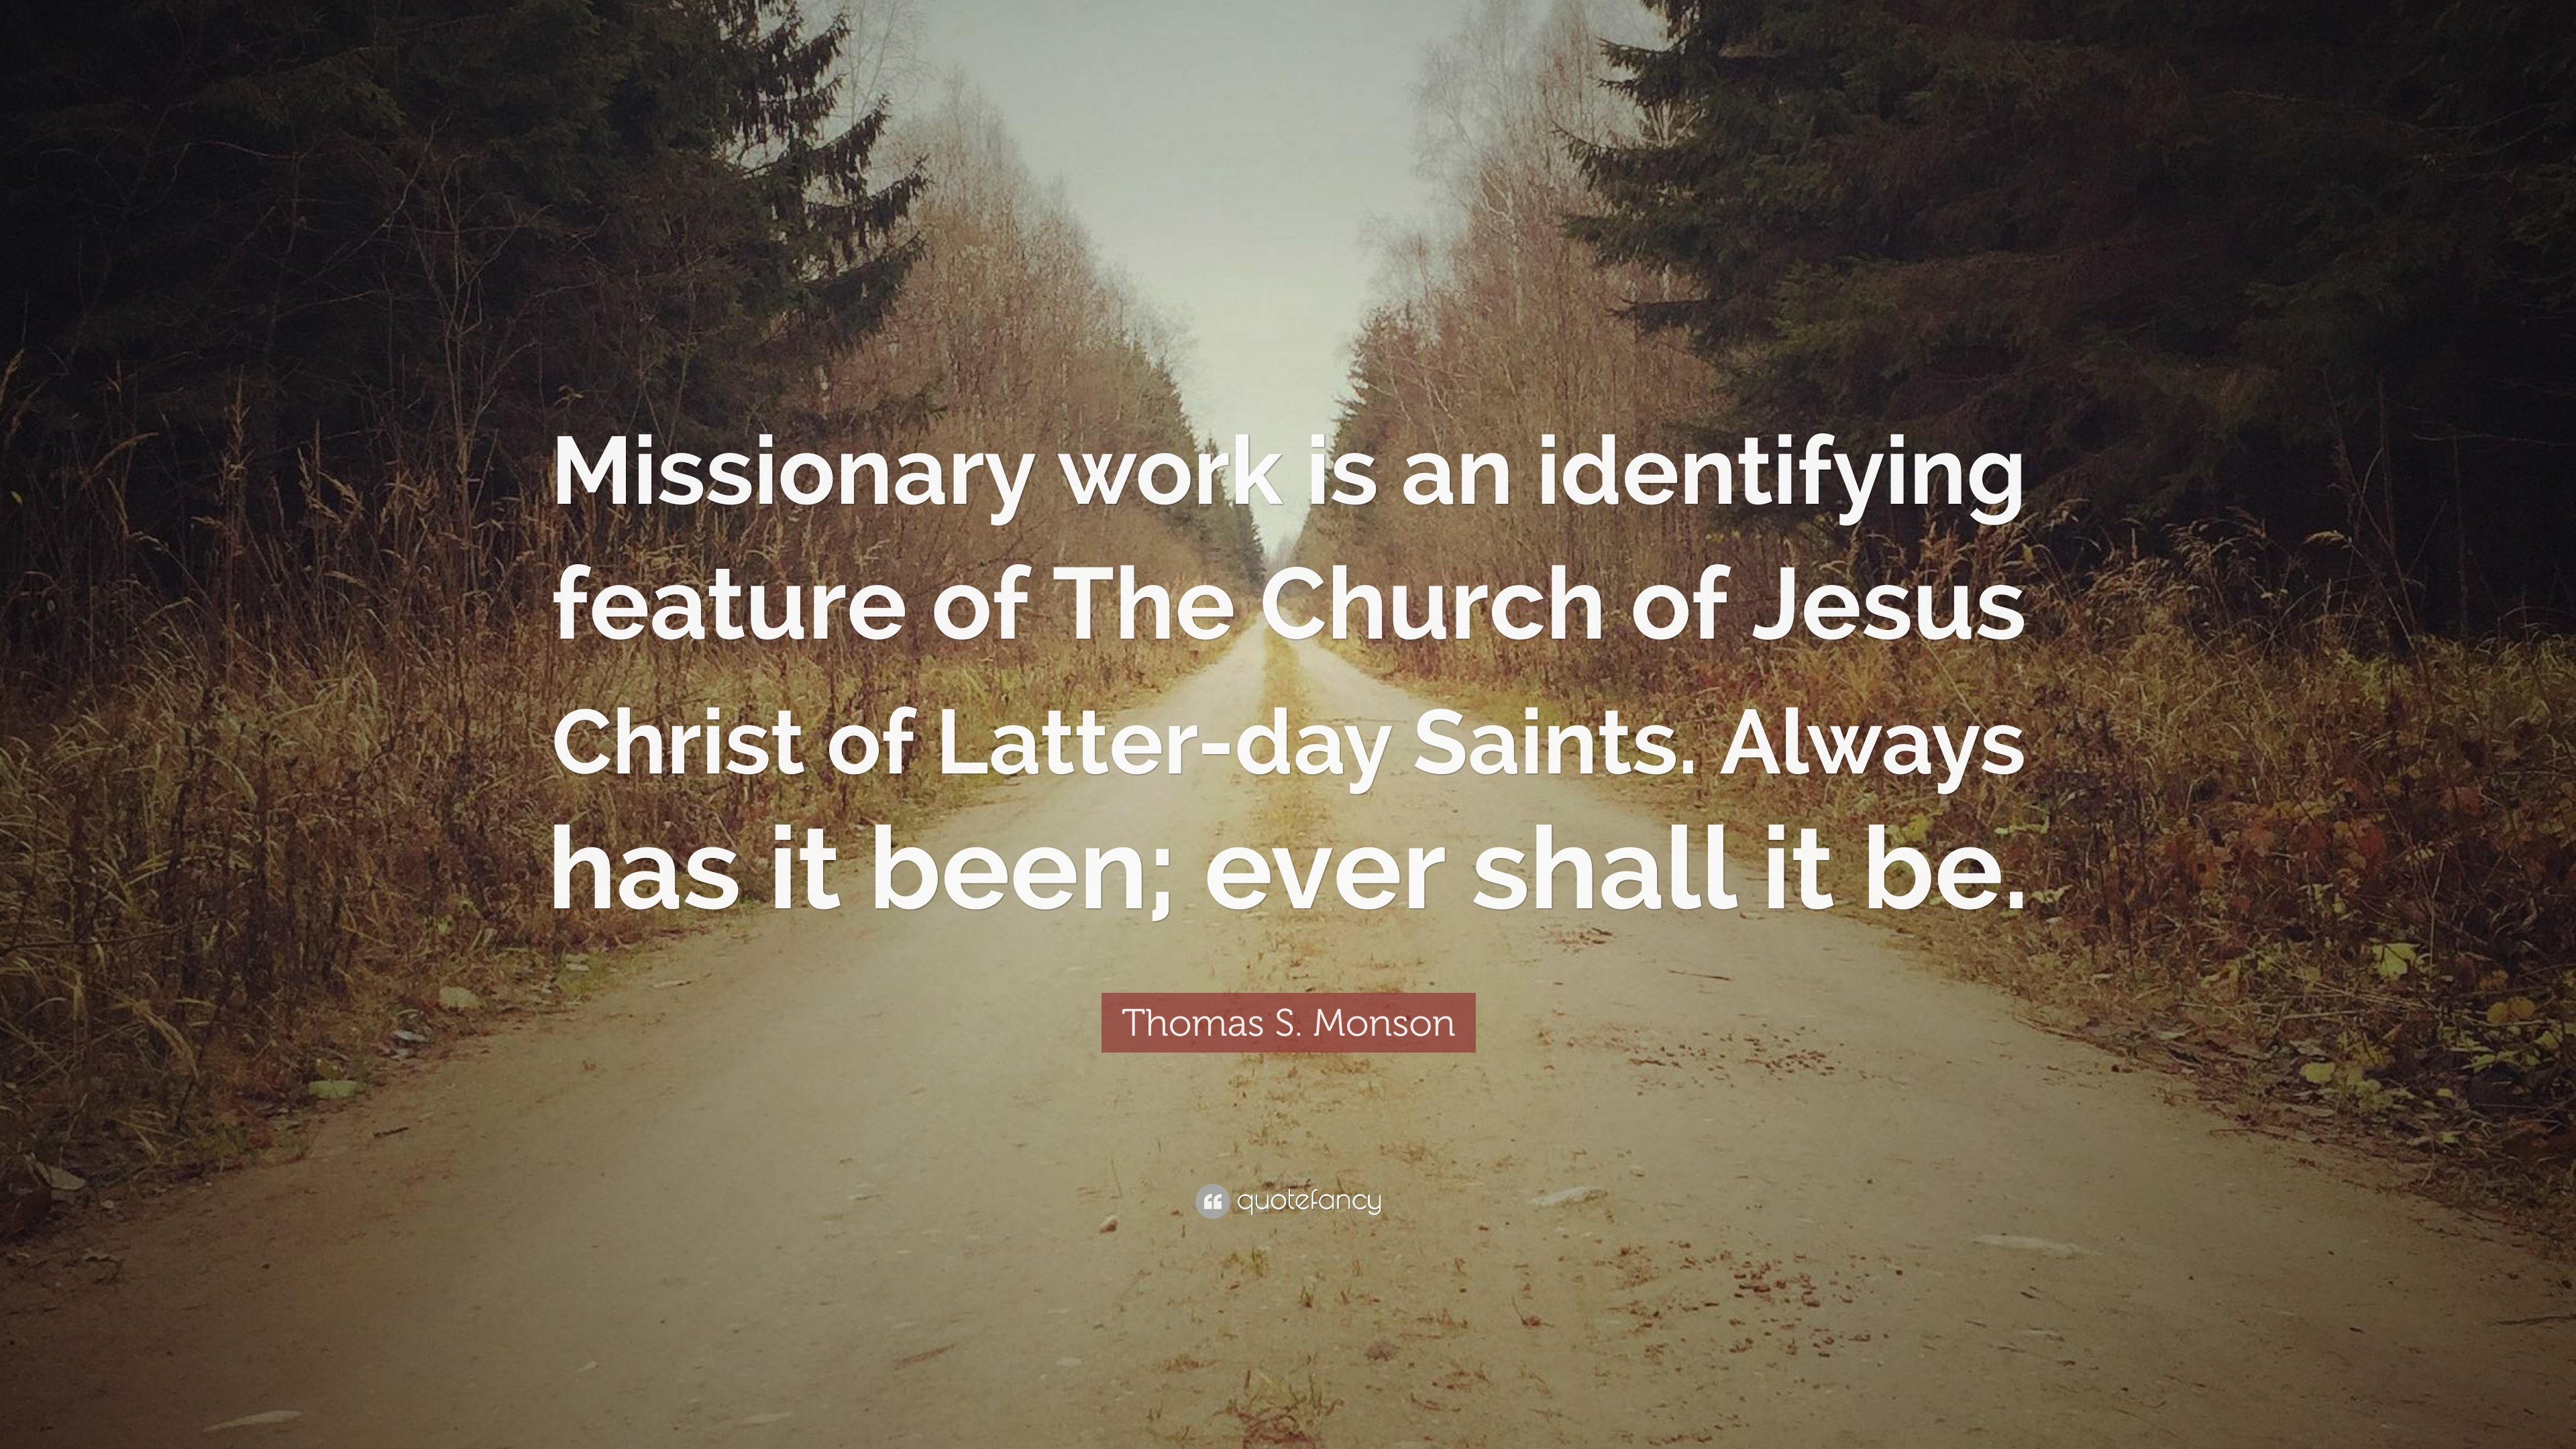 Thomas S. Monson Quote: “Missionary Work Is An Identifying Feature Of The Church Of Jesus Christ Of Latter Day Saints. Always Has It Been; Ever S.”